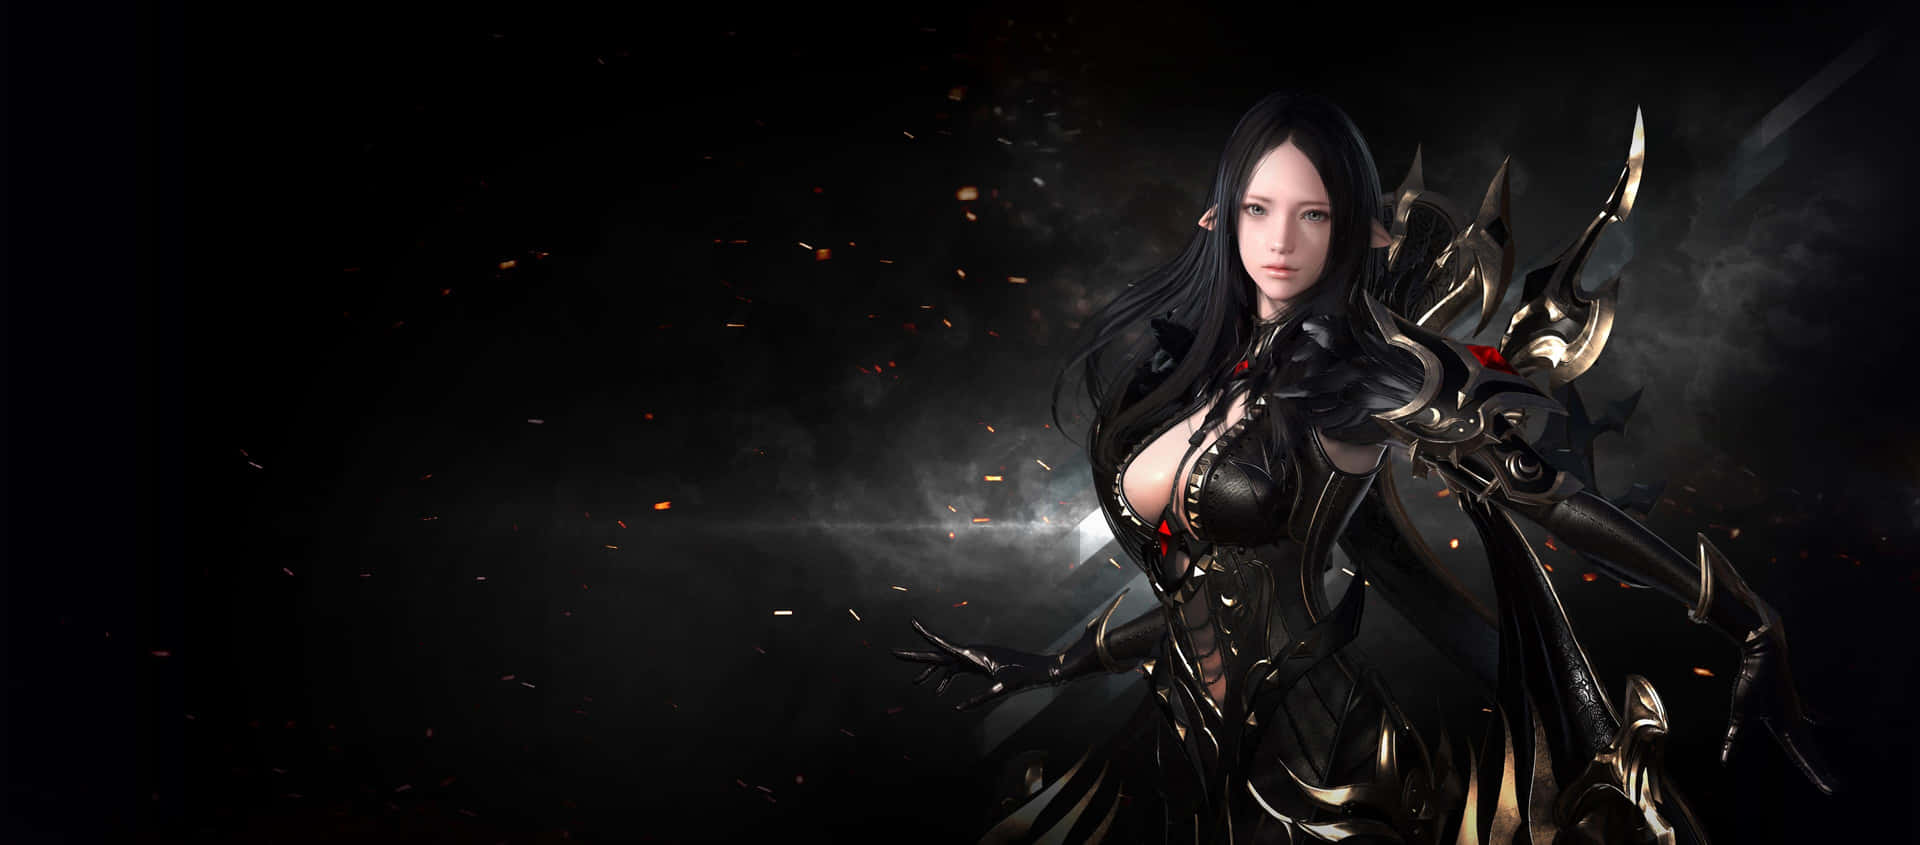 A Woman In Black Armor With Swords Background